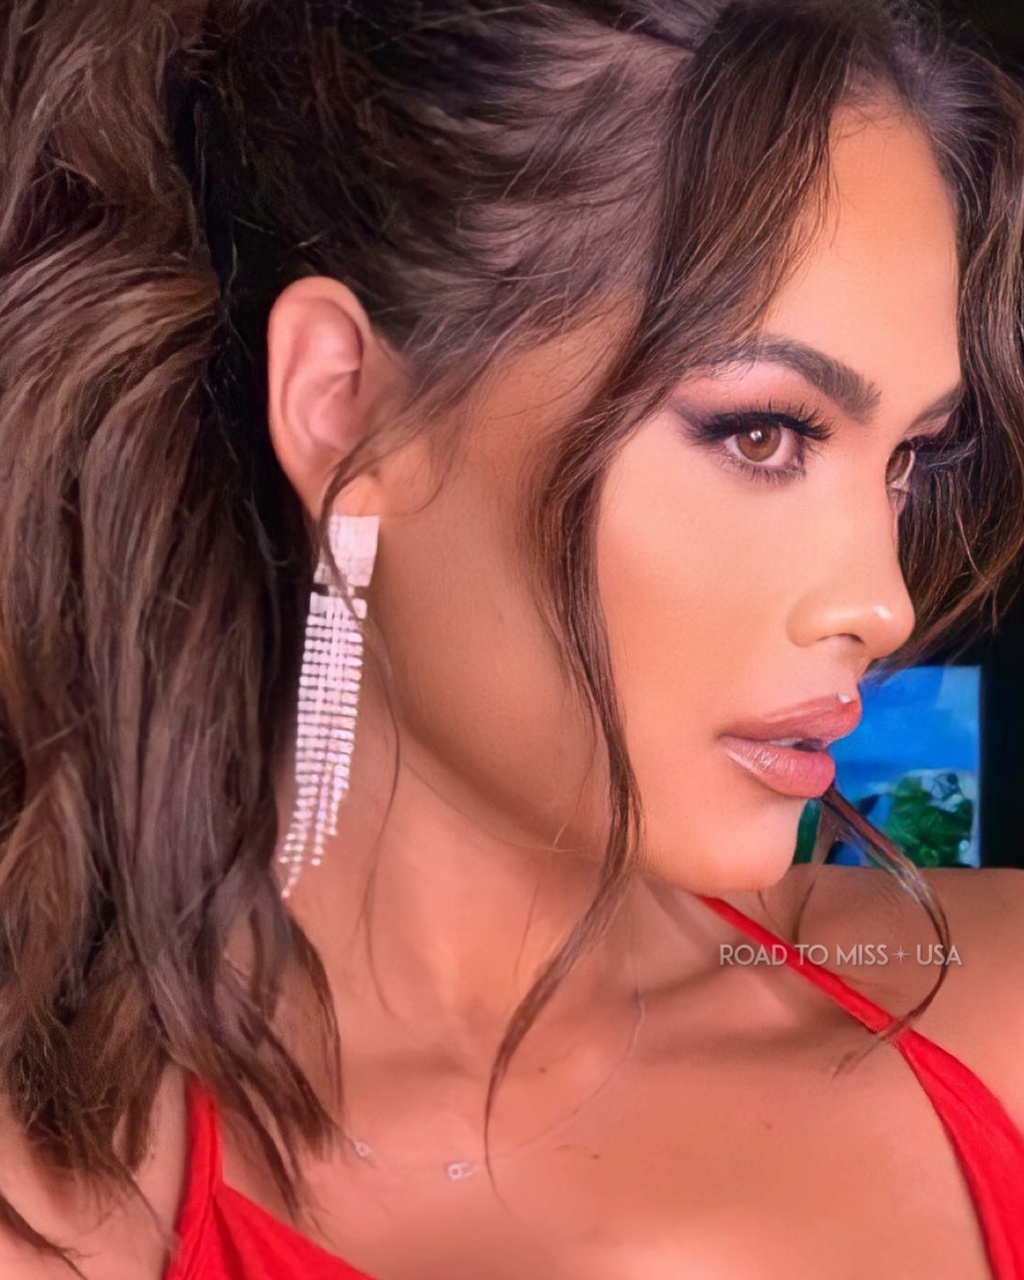 The Official Thread Of Miss Universe 2020 - Andrea Meza of Mexico  - Page 6 24221911